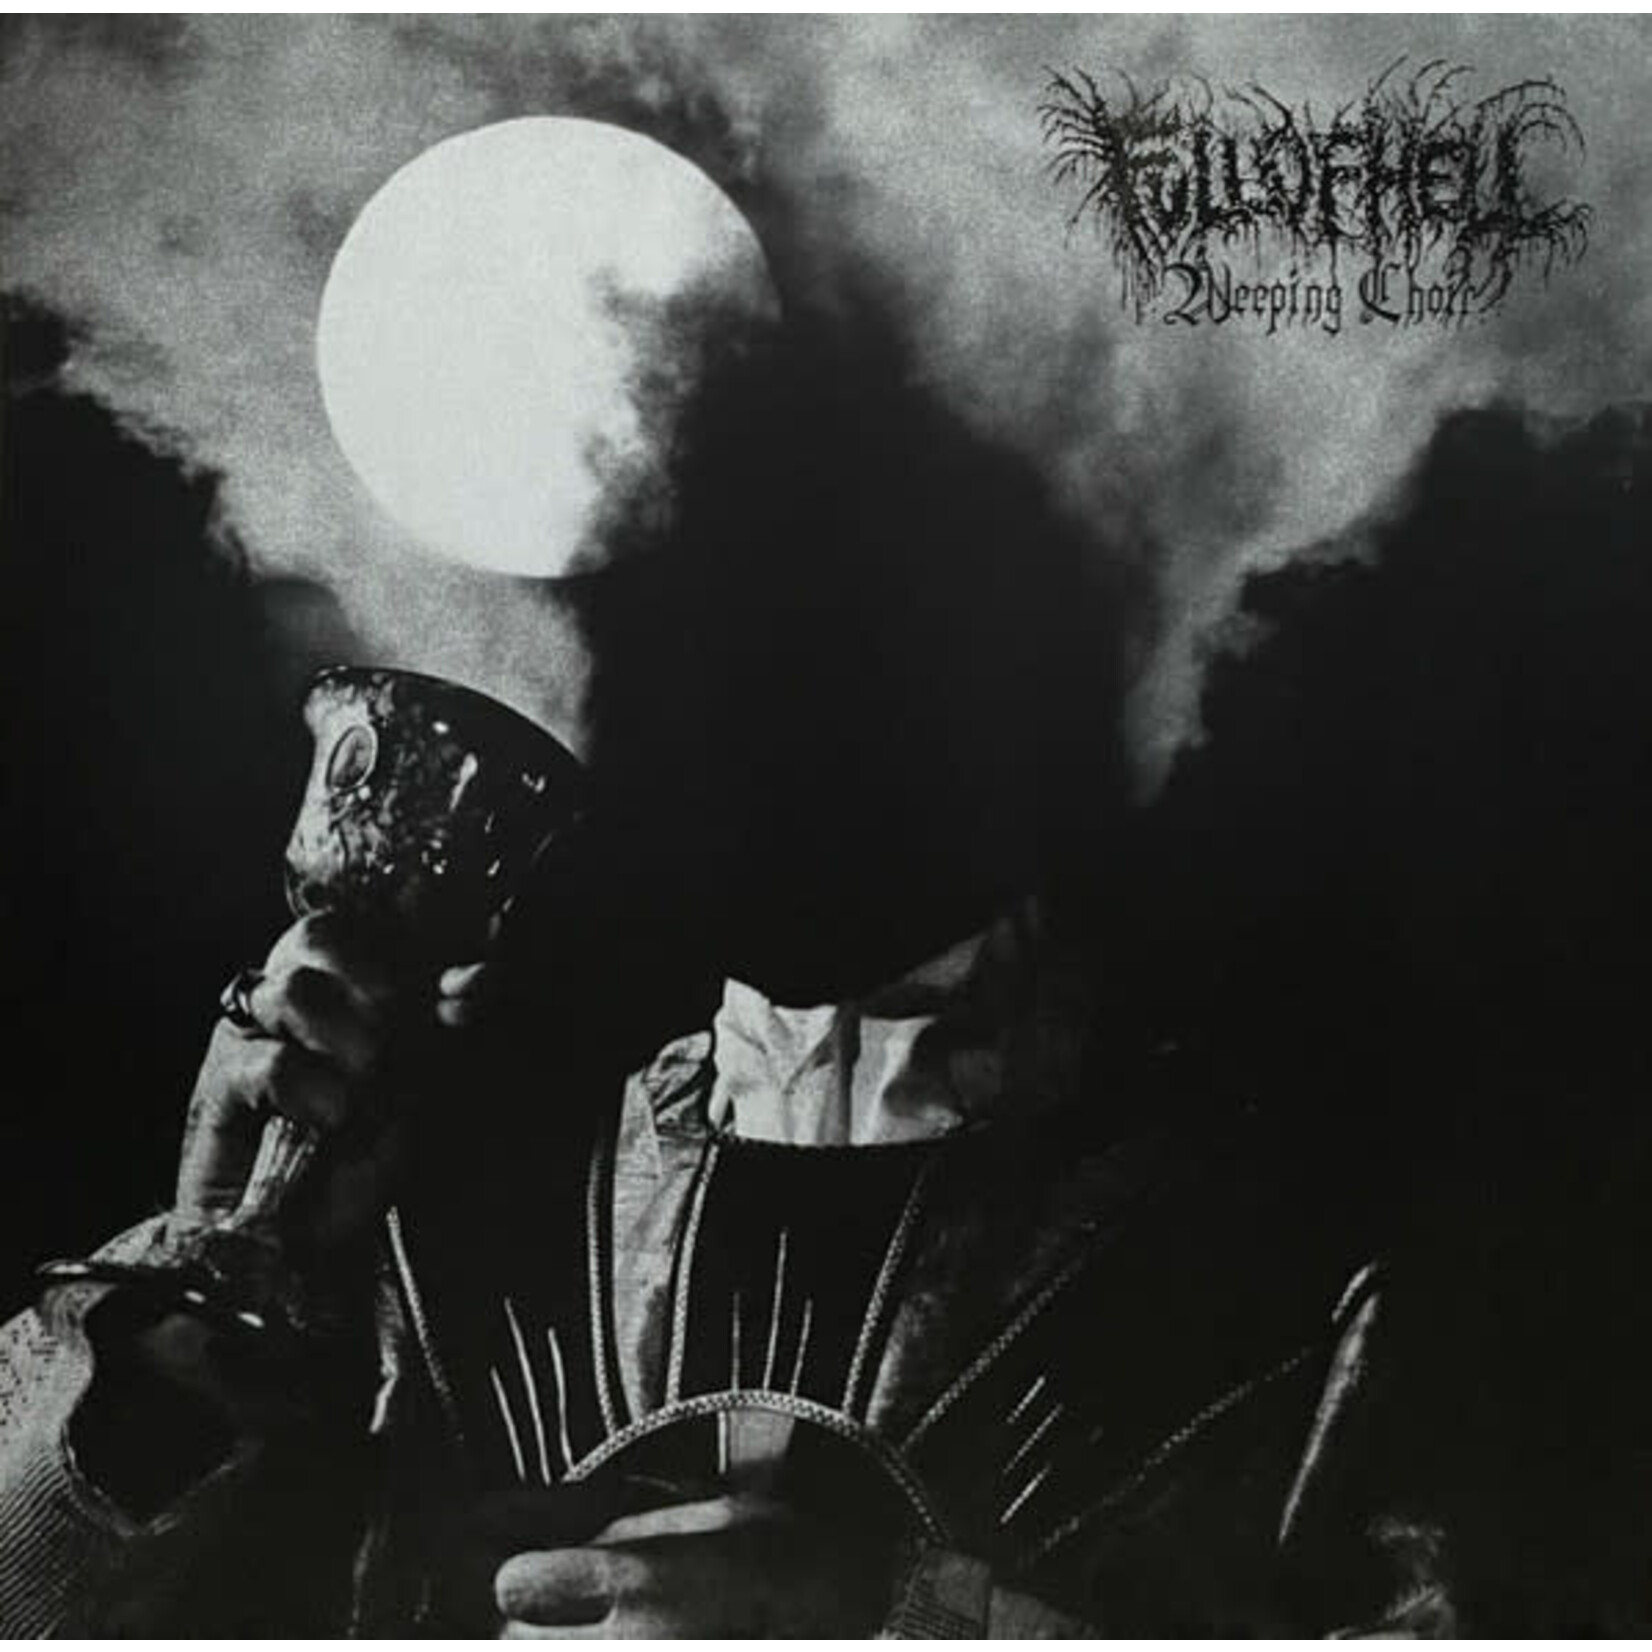 Relapse Full Of Hell - Weeping Choir (LP) [Clear/White/Black]